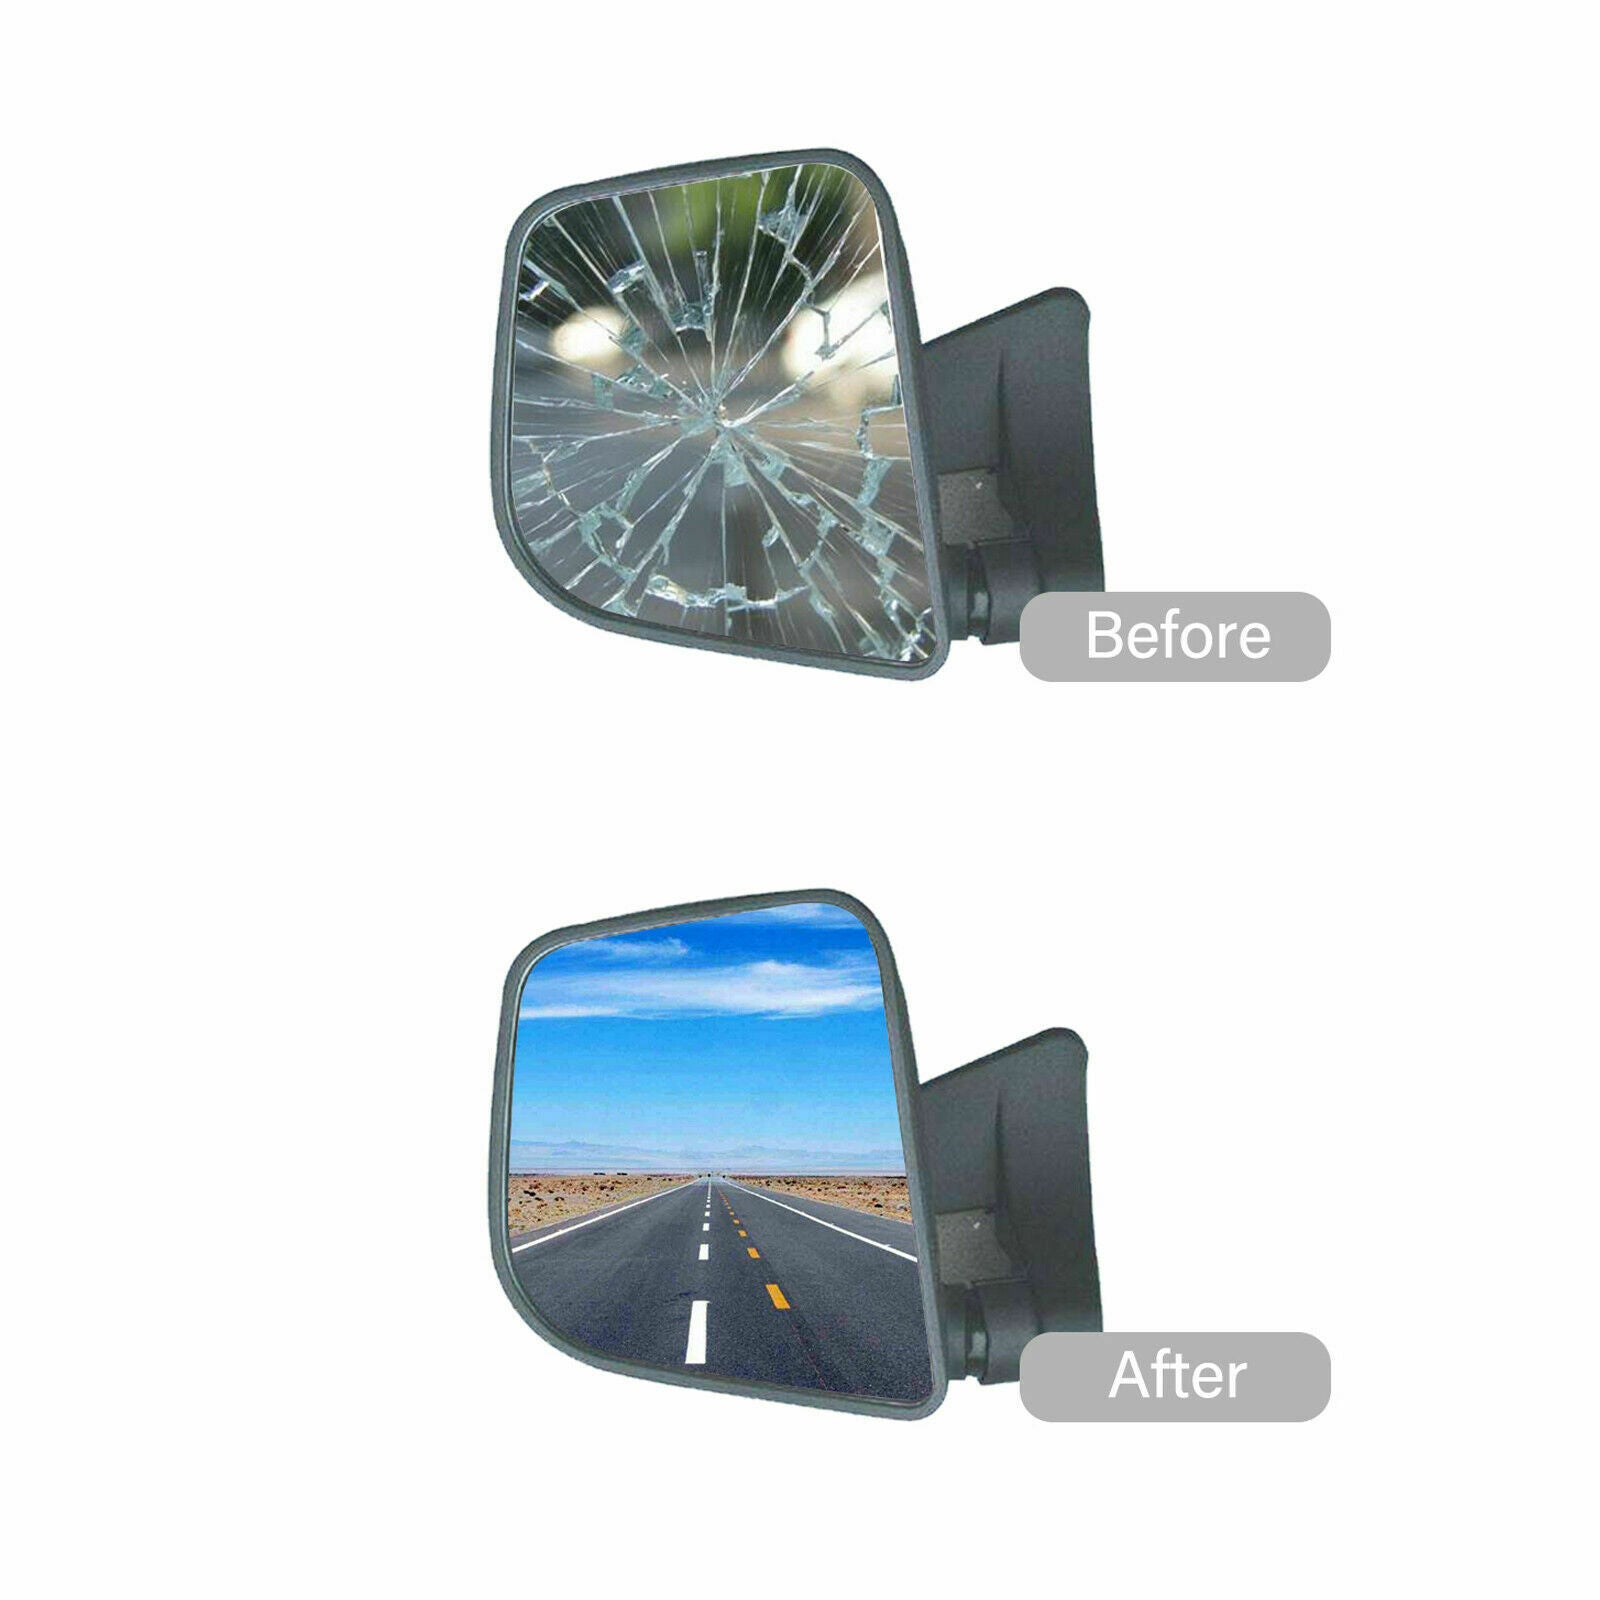 WLLW Replacement Mirror Glass for 2003-2006 Jeep Wrangler/Jeep TJ, Driver Left Side LH/Passenger Right Side RH/The Both Sides Flat M-0056